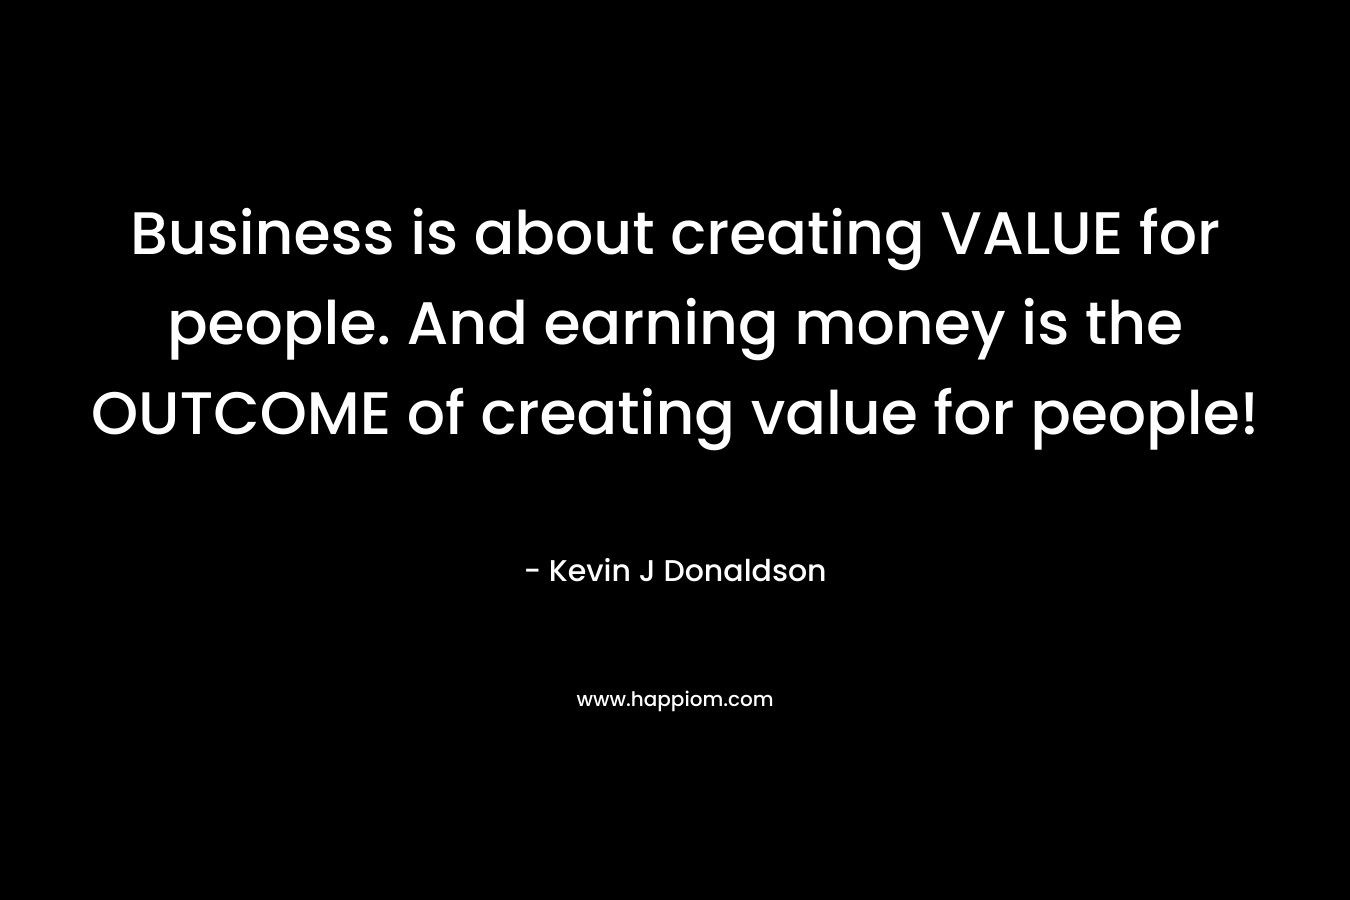 Business is about creating VALUE for people. And earning money is the OUTCOME of creating value for people!